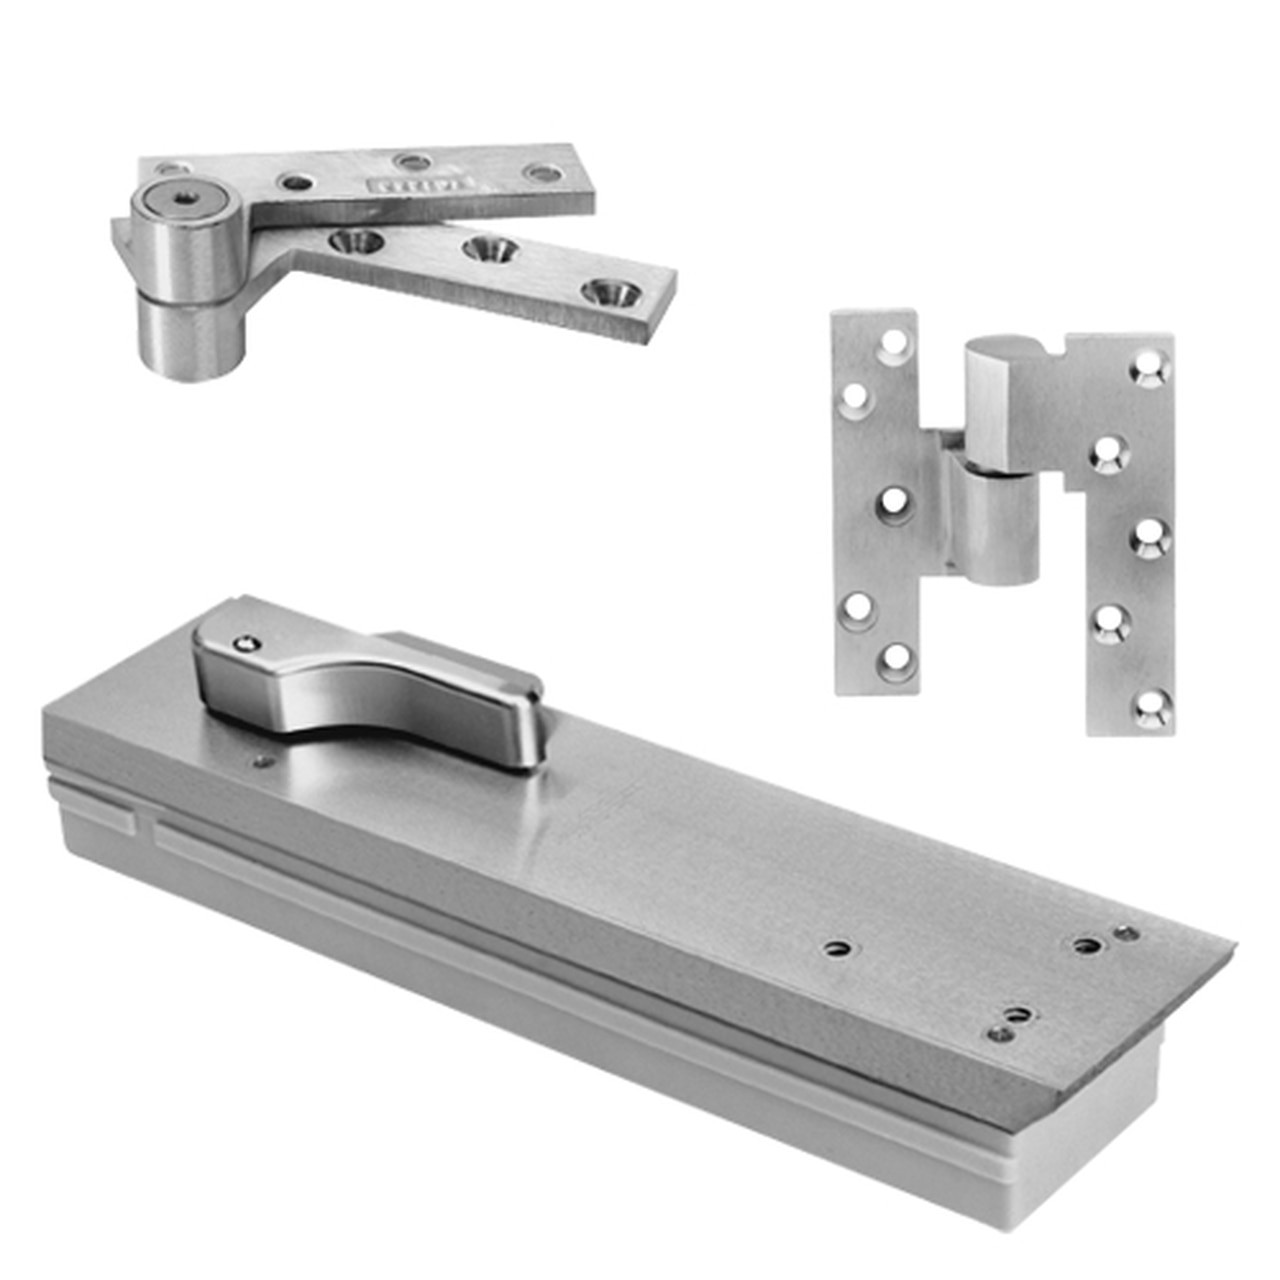 FQ5105NBC-LCC-LH-626 Rixson Q51 Series Fire Rated 3/4" Offset Hung Shallow Depth Floor Closers in Satin Chrome Finish